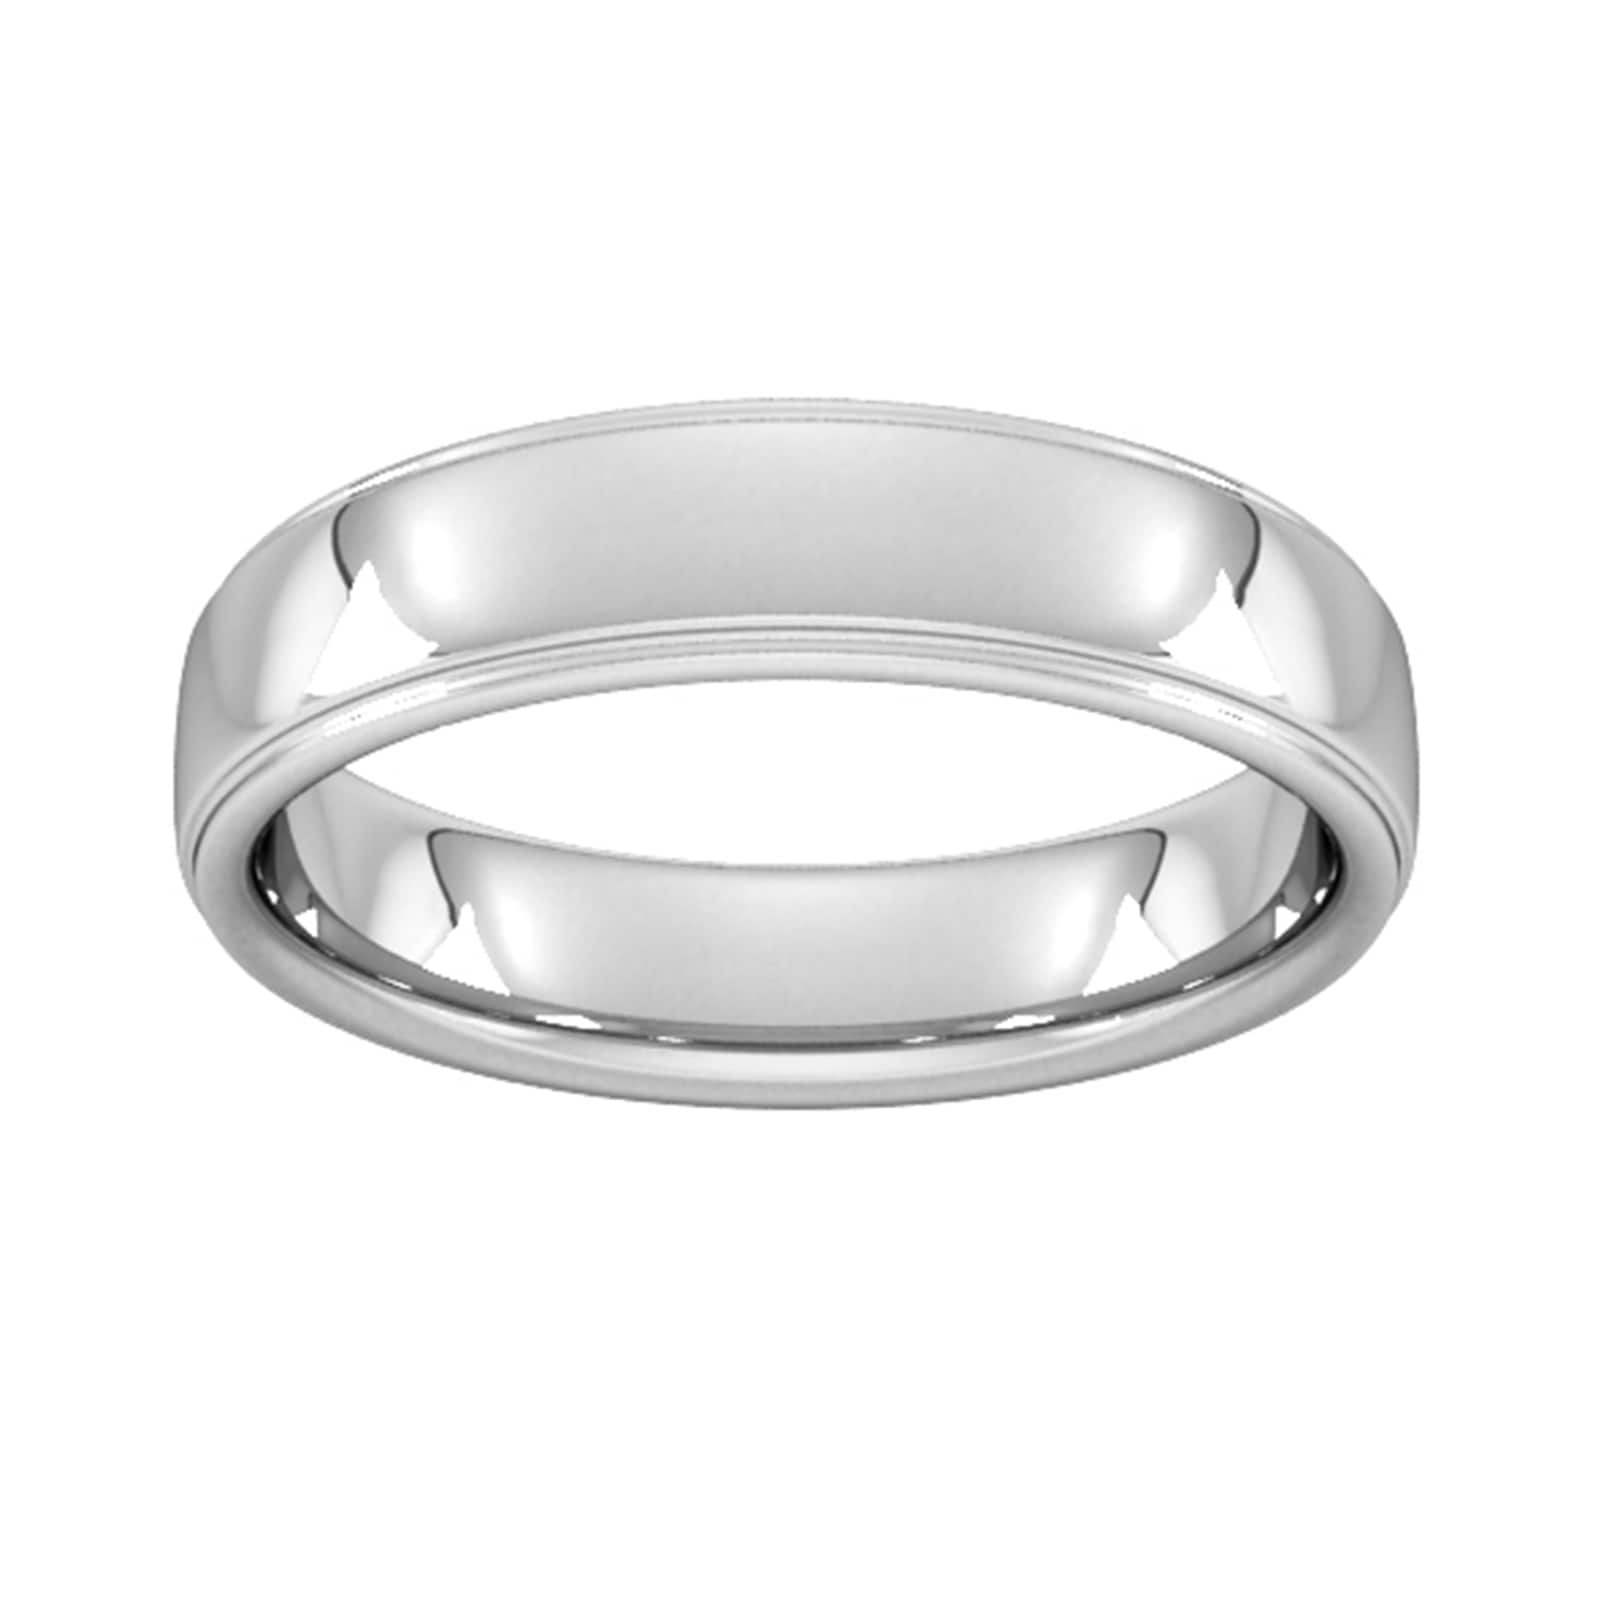 5mm Traditional Court Standard Polished Finish With Grooves Wedding Ring In Platinum - Ring Size M